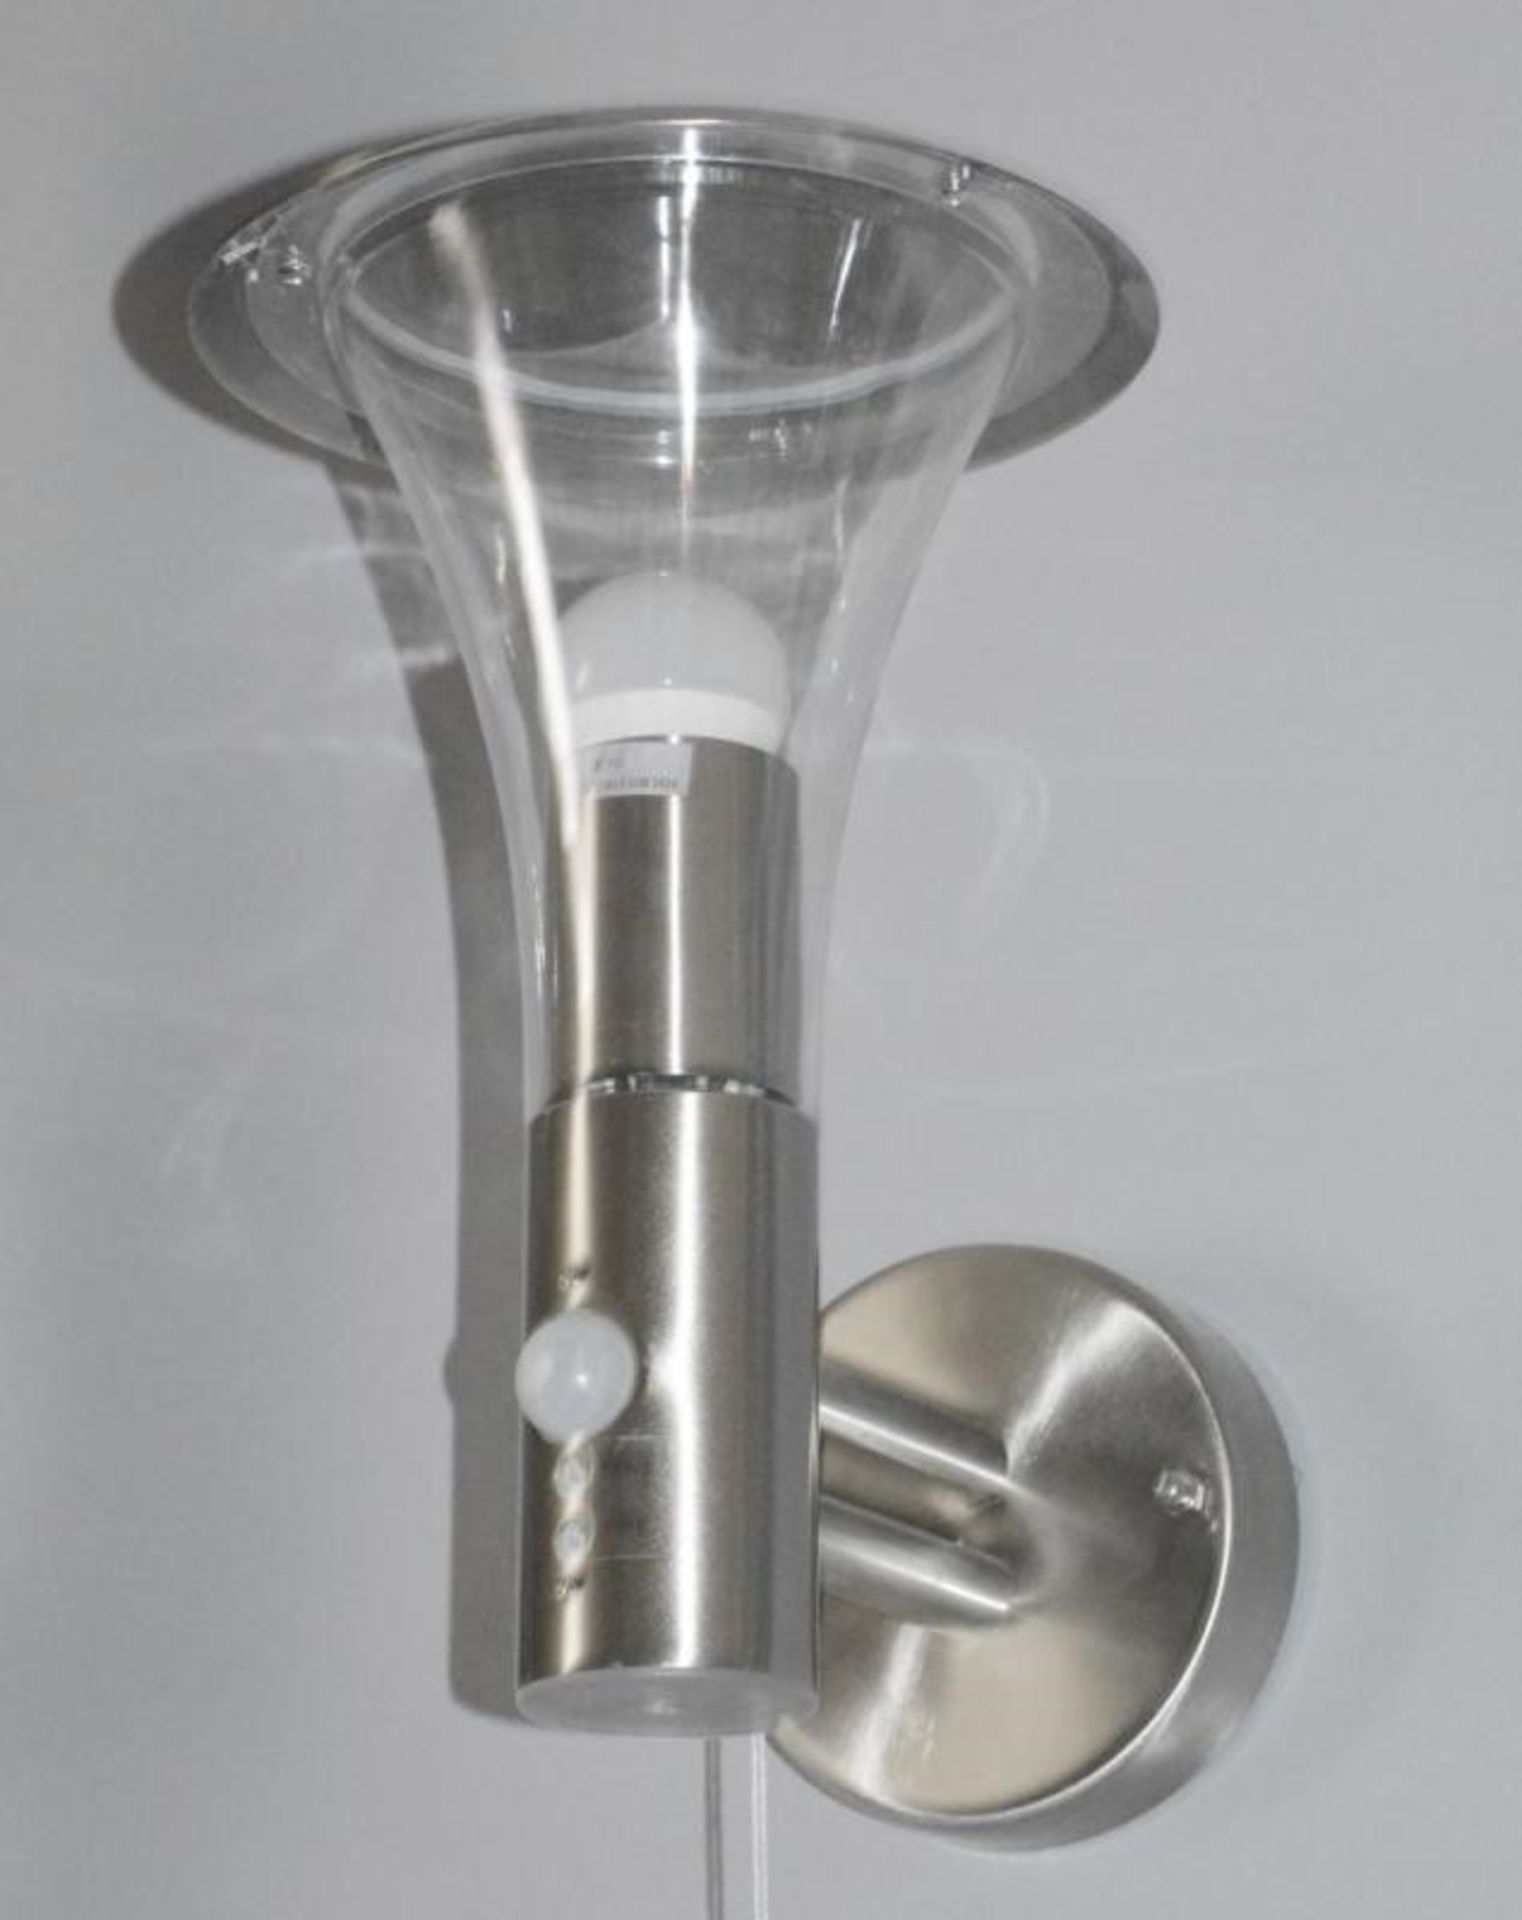 1 x STRAND IP44 Stainless Steel Outdoor Wall Light With Clear Polycarbonate Diffuser And Motion Sens - Image 4 of 4